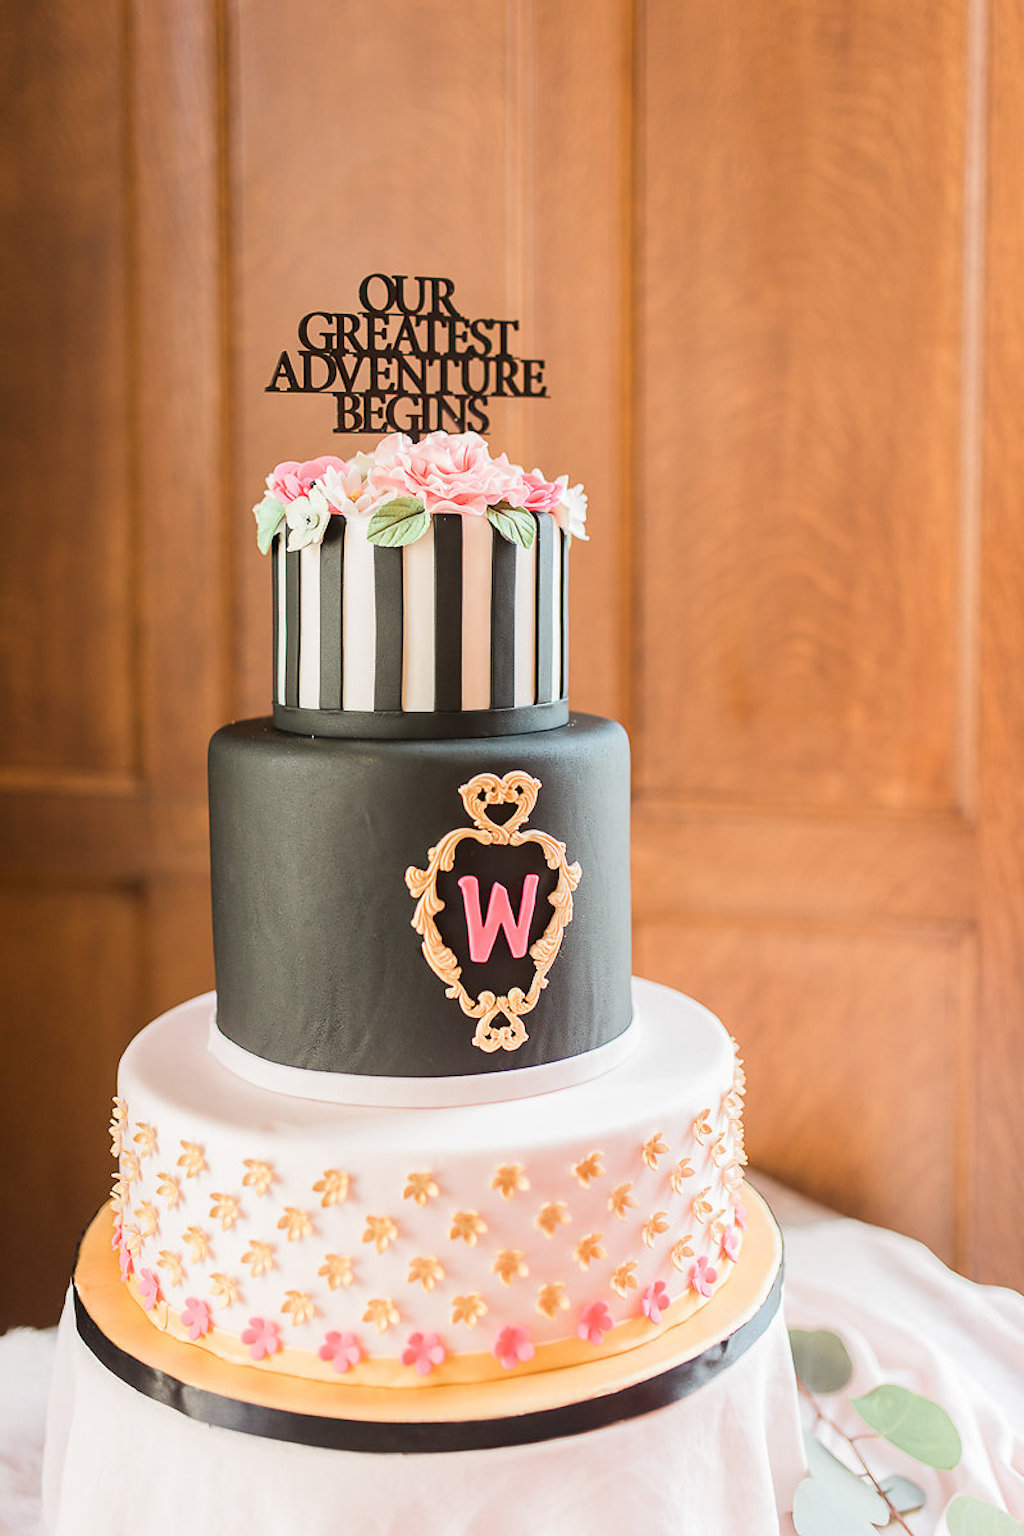 Three Tier Kate Spade Inspired Round Wedding Cake with Black and White Striped Fondant, Pink Icing Flowers with Greenery, Black Laser Cut Cake Topper, Icing Initial in Gold Frame on Gold Cake Stand